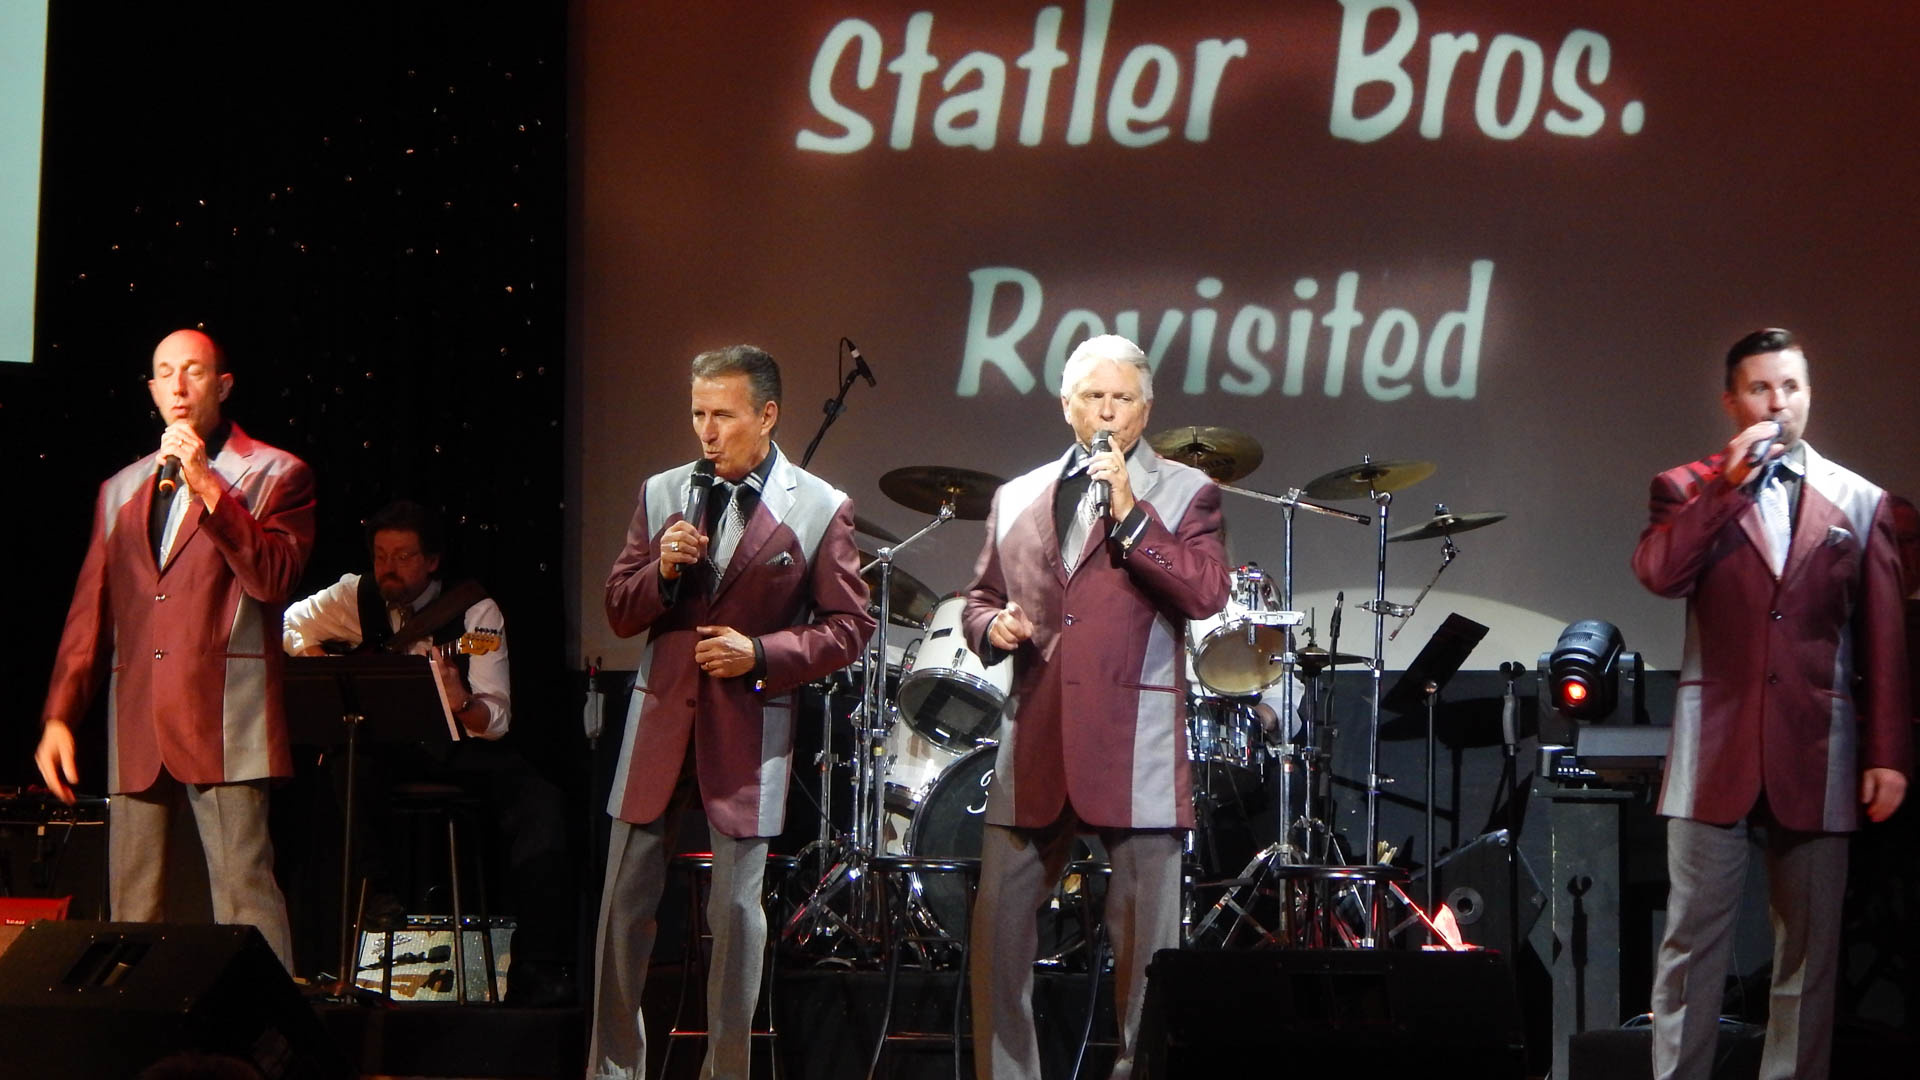 The Statler Brothers, Classic country hits, God and Country Theatre, Branson entertainment, 1920x1080 Full HD Desktop